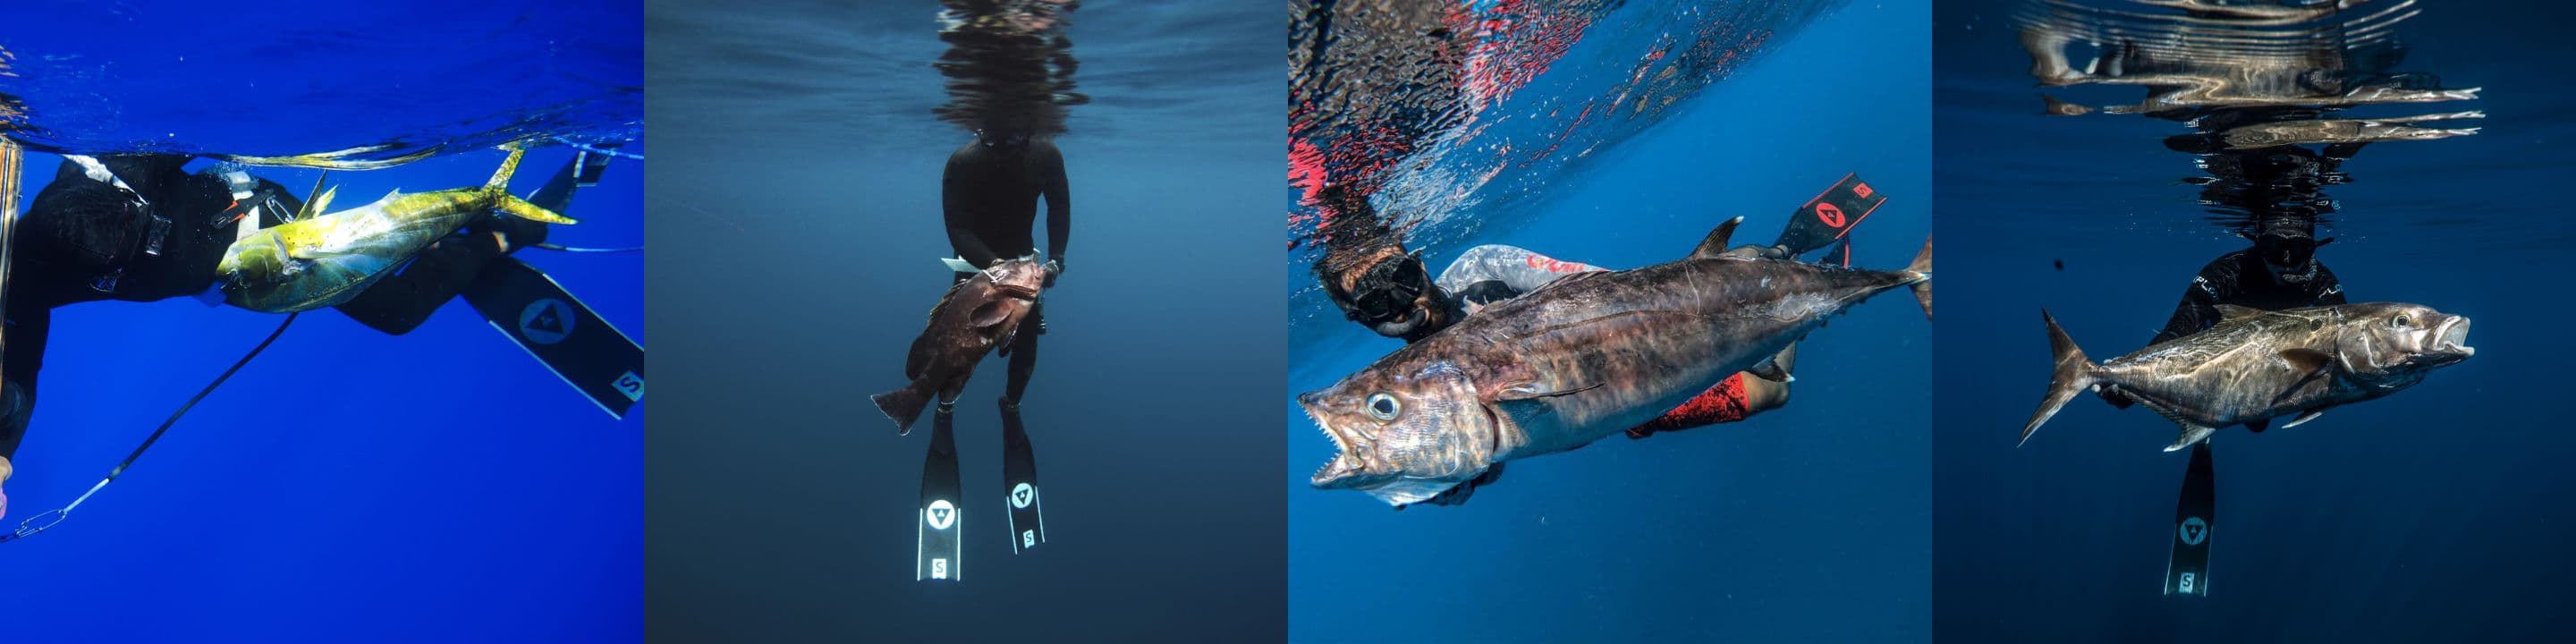 @ Discover Alchemy Spearfishing On Instagram